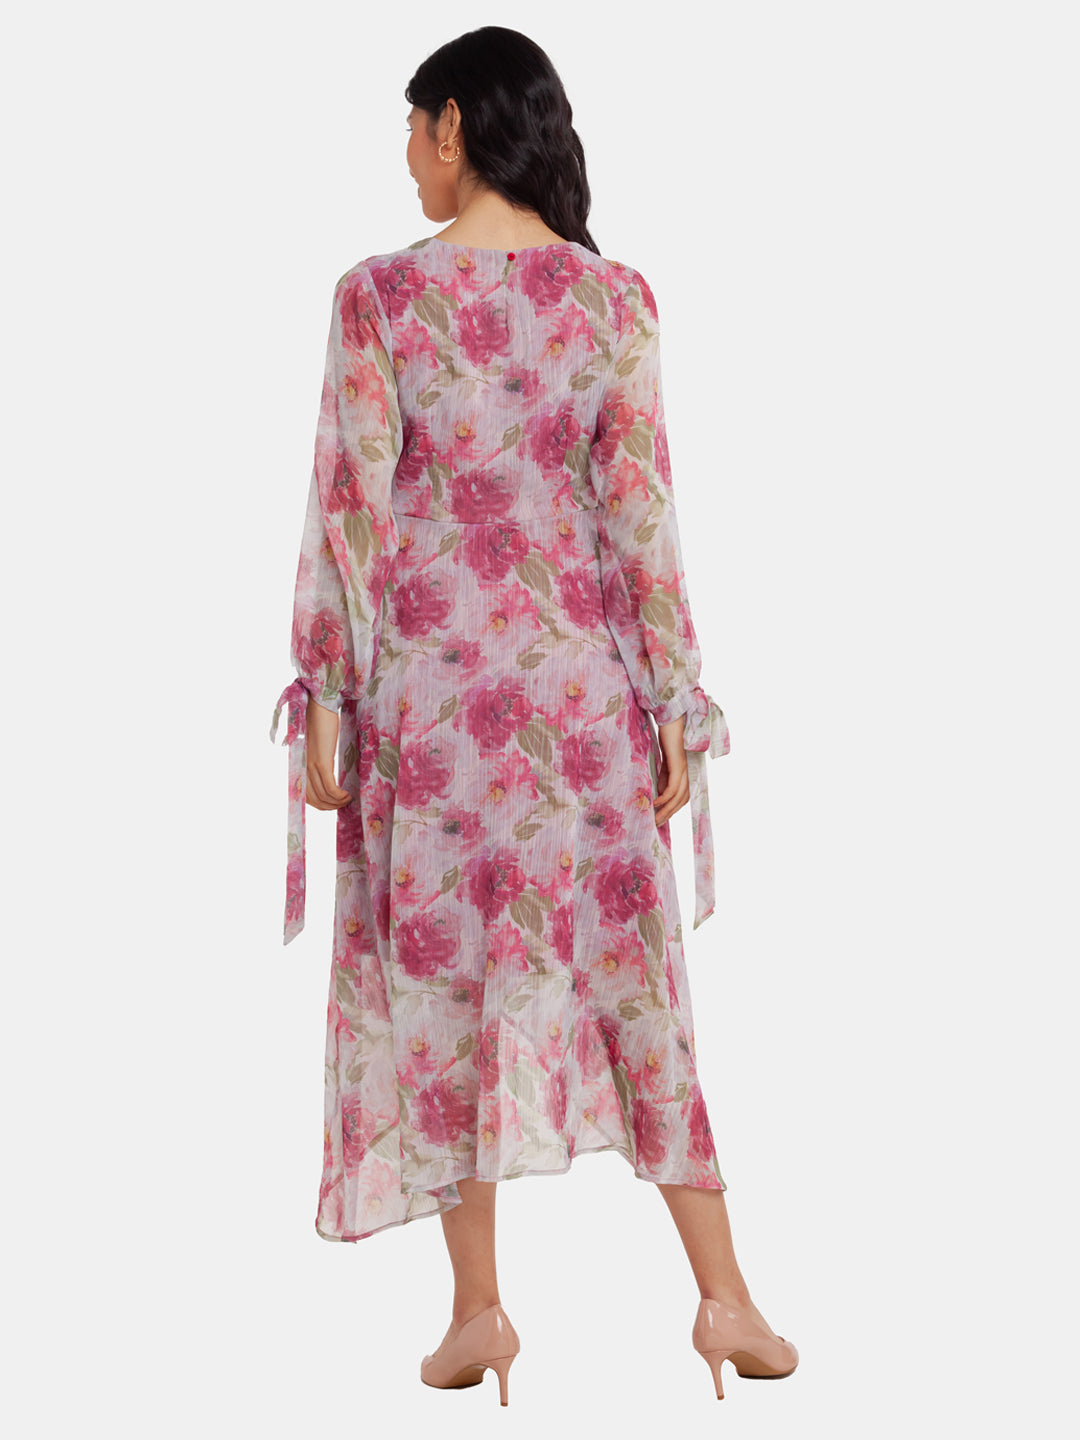 Off White Printed Tie-Up Midi Dress For Women